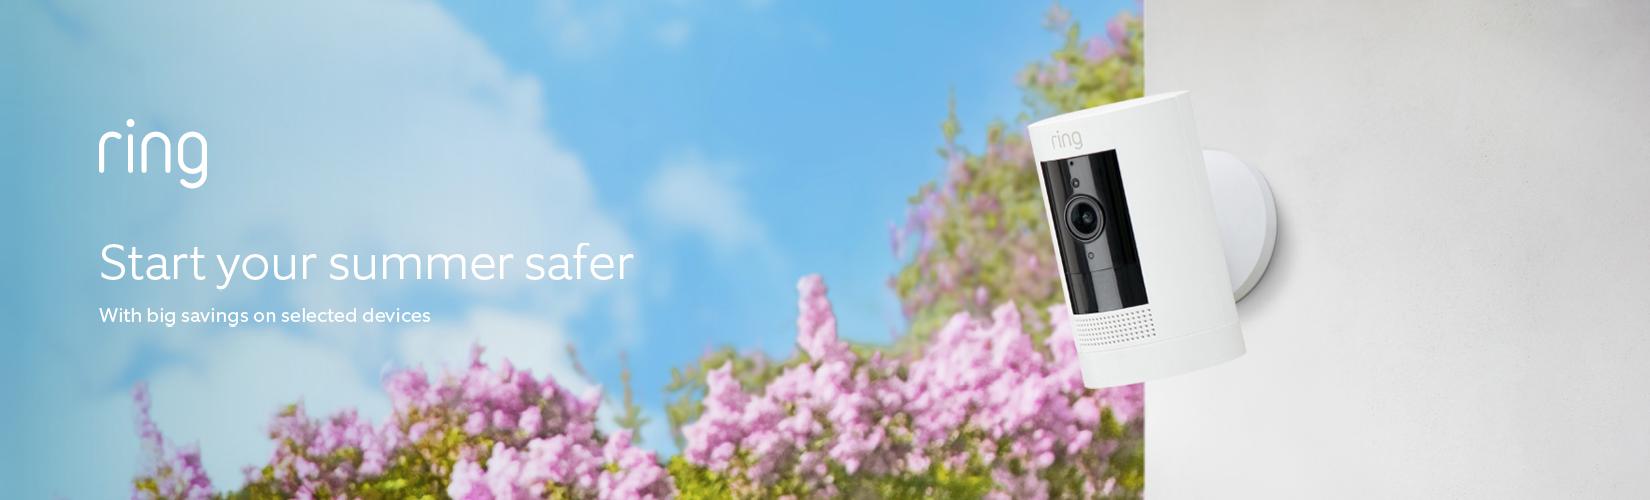 Ring. Start your summer safer with big savings on selected devices.